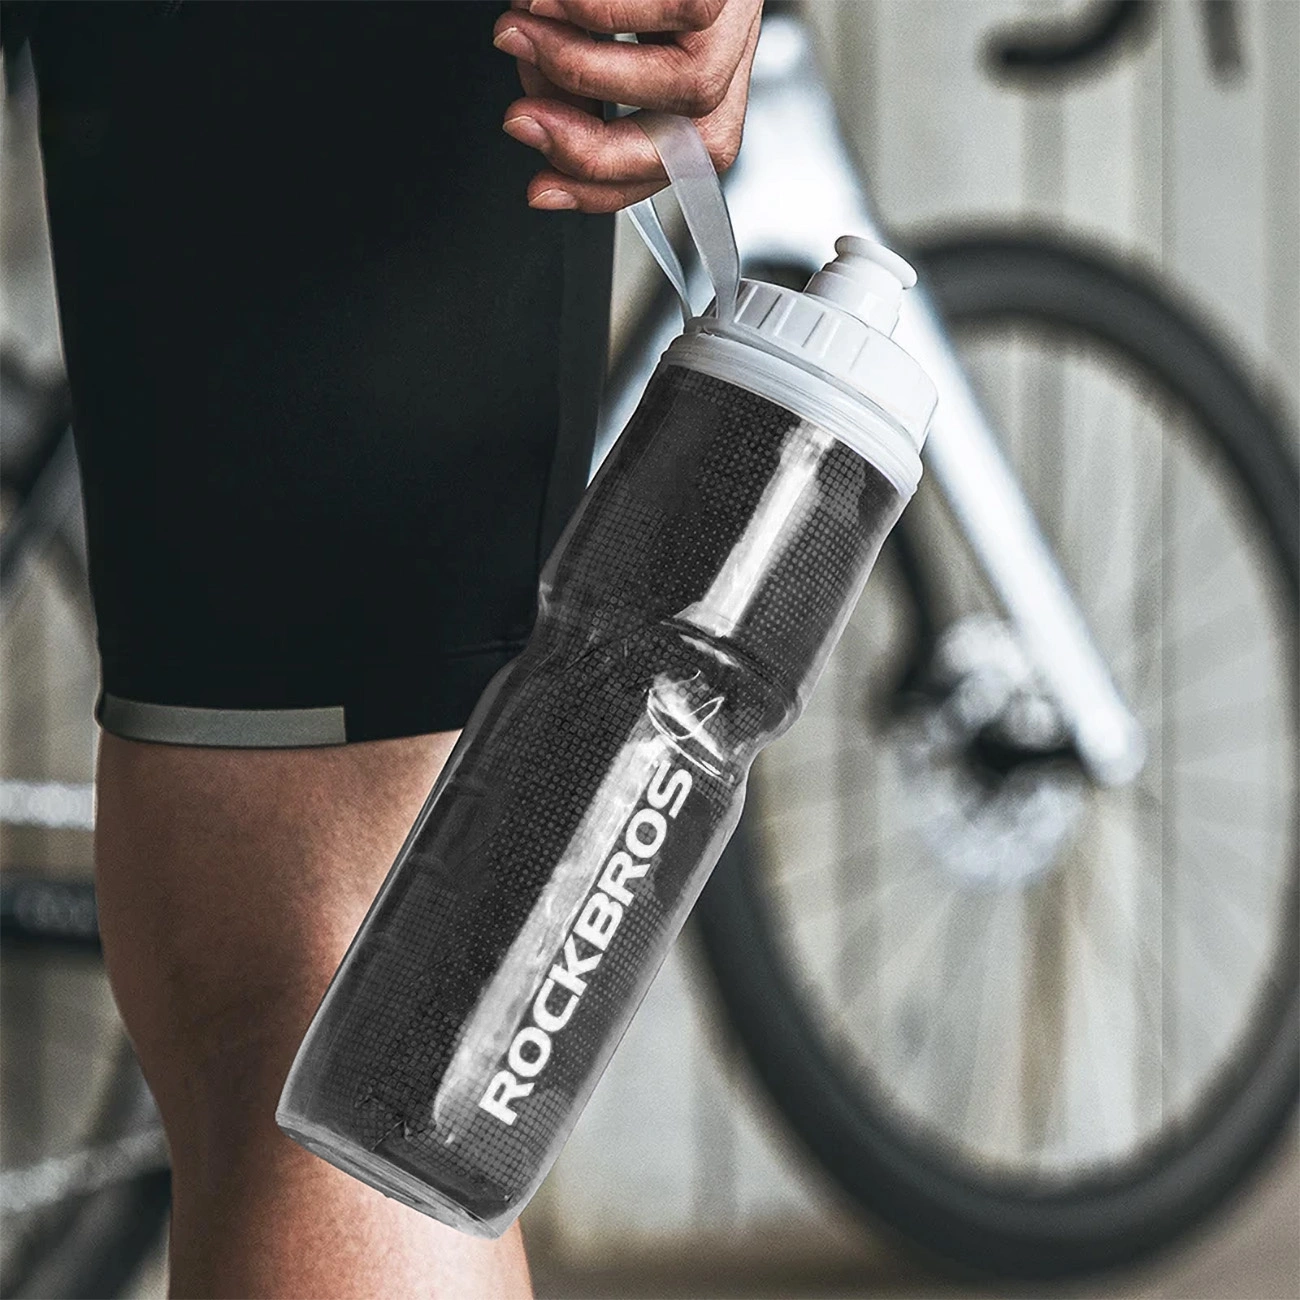 A man holding the handle of a Rockbros 35210019001 bicycle water bottle along his body. There is a bicycle in the background